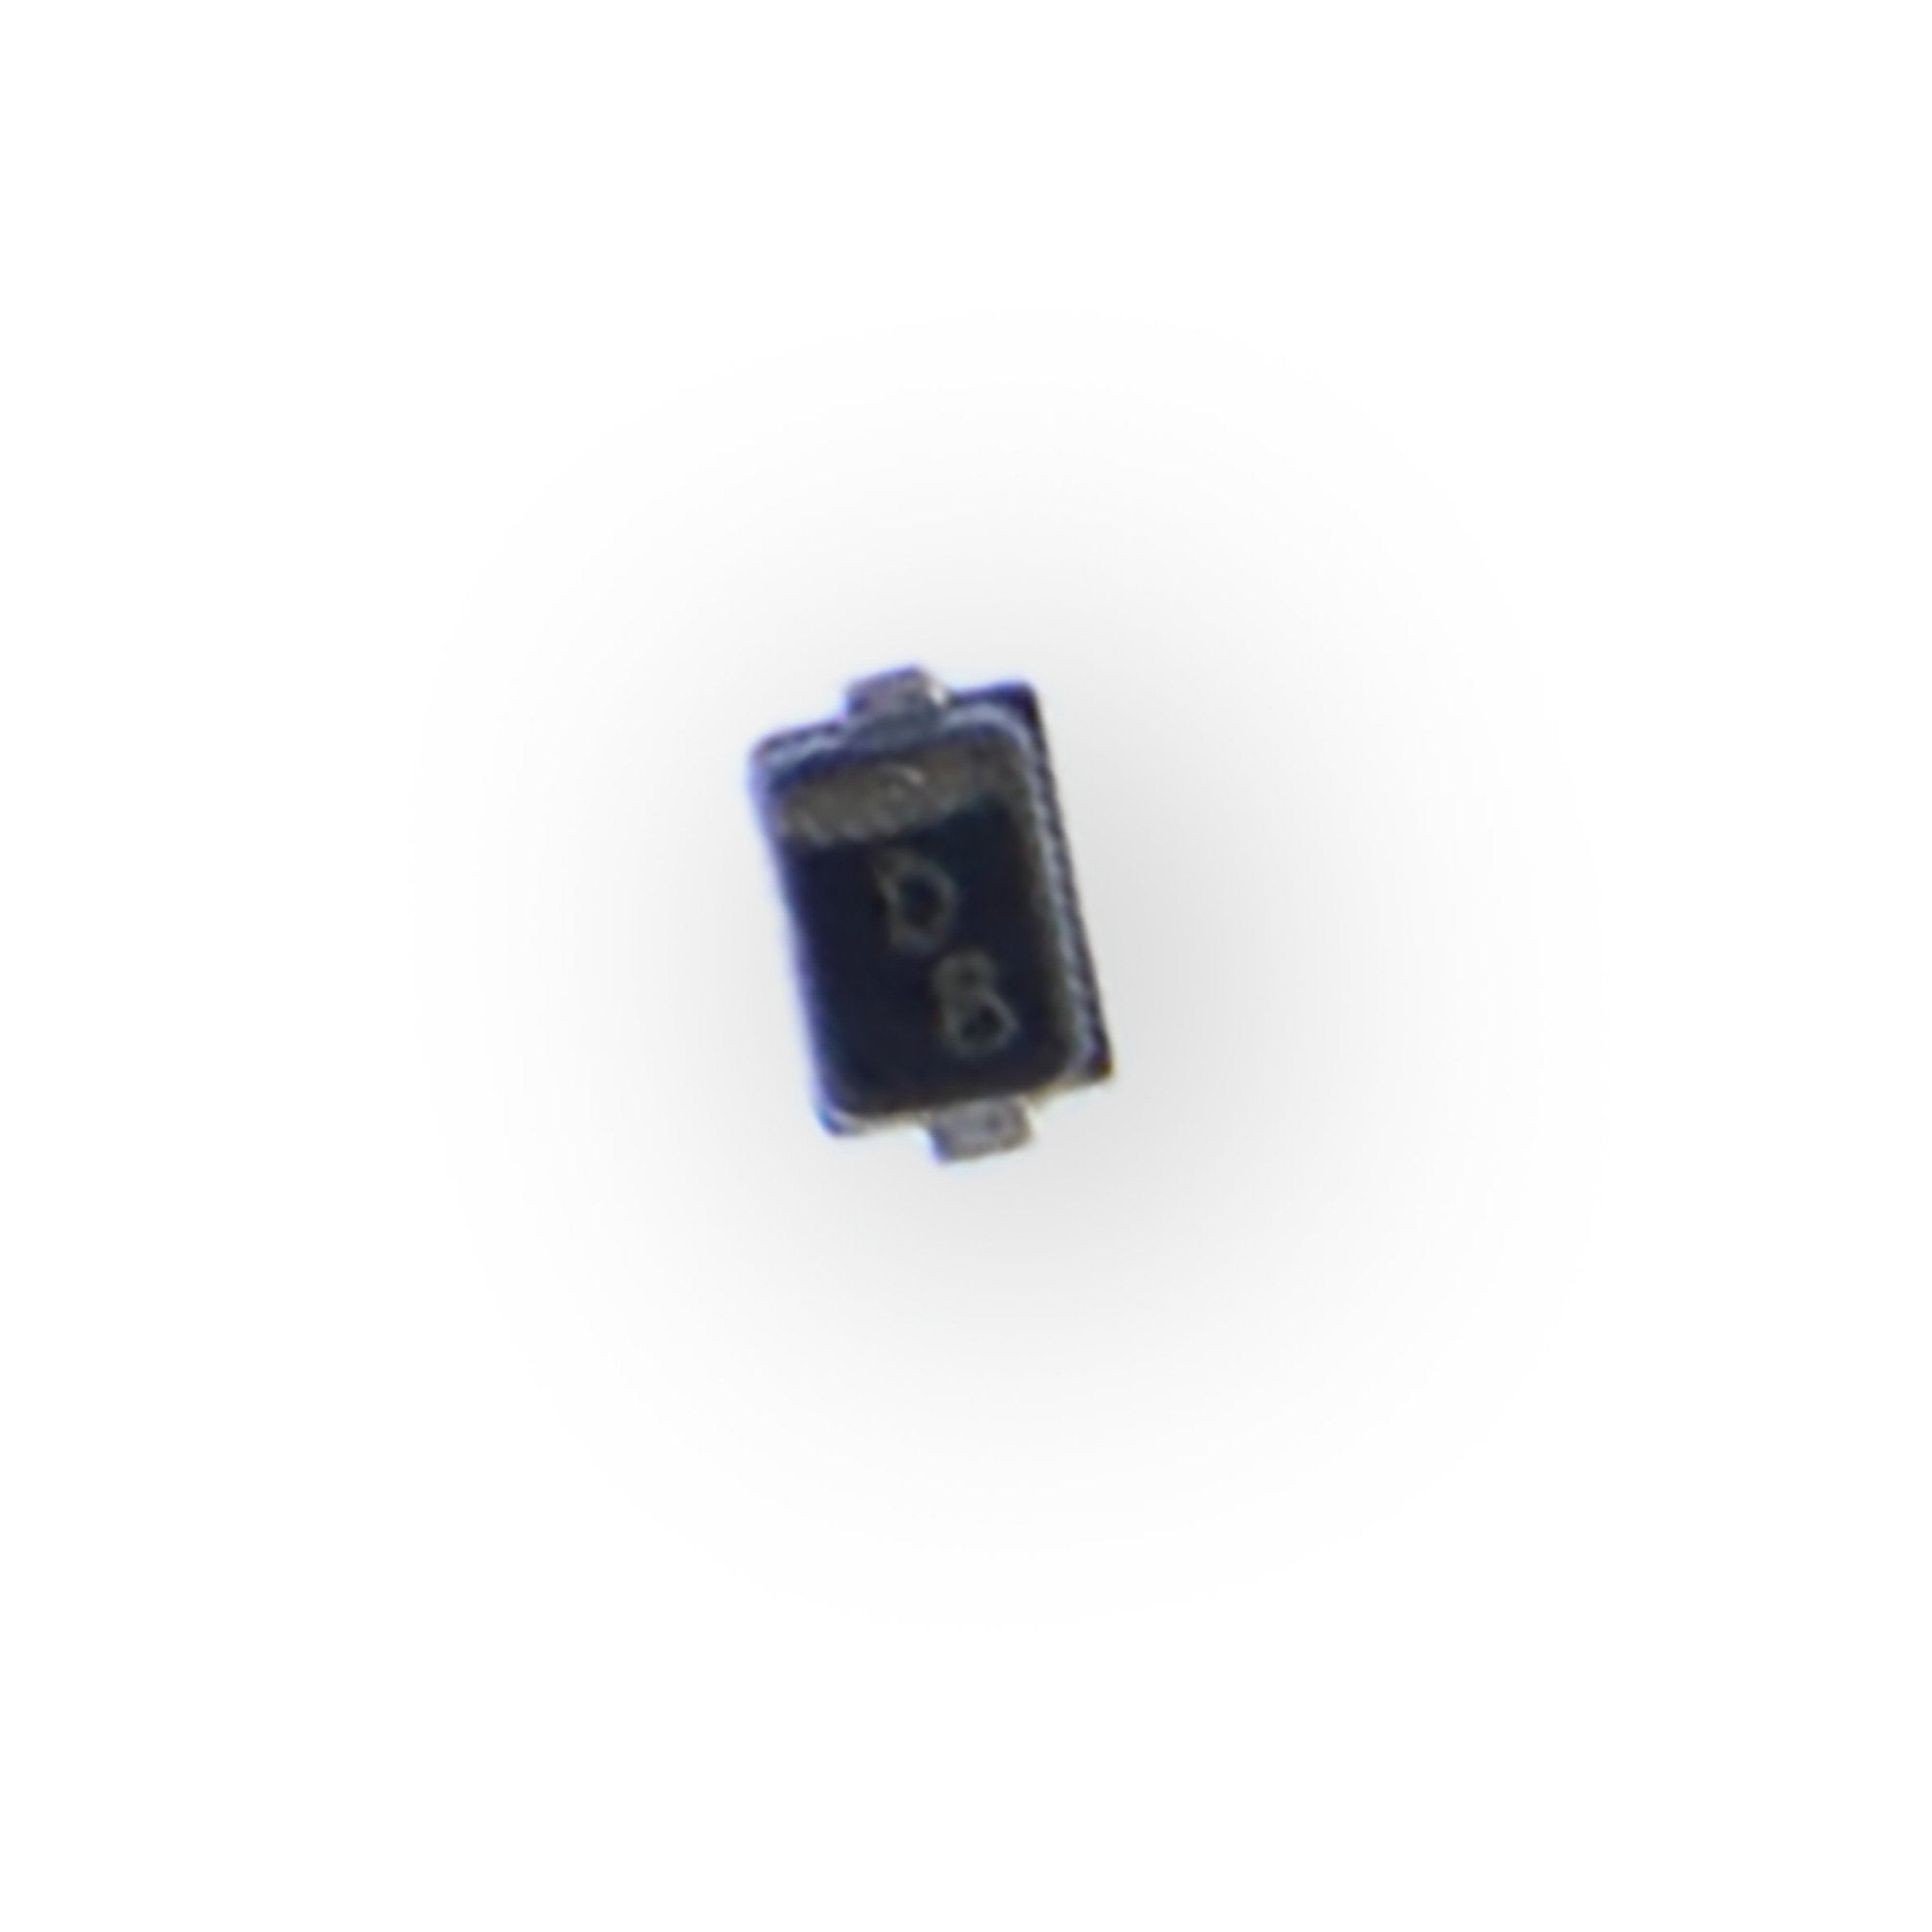 iPhone 6/6s/7 Backlight Diode